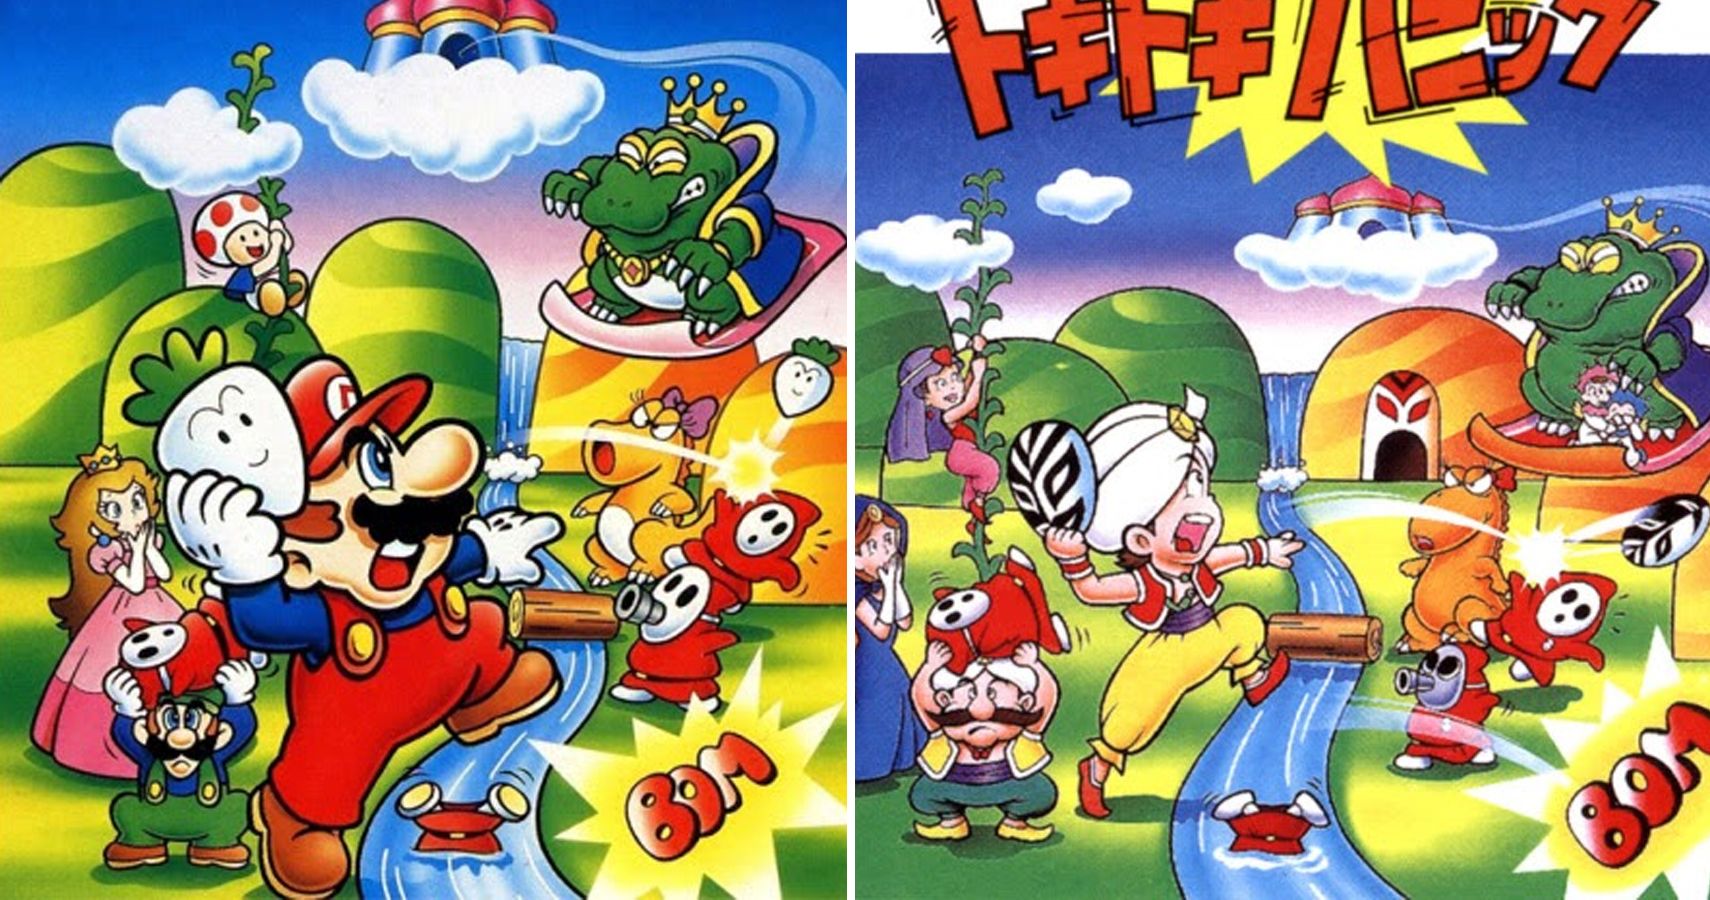 15 Things You Didn't Know About The Original Super Mario Bros.